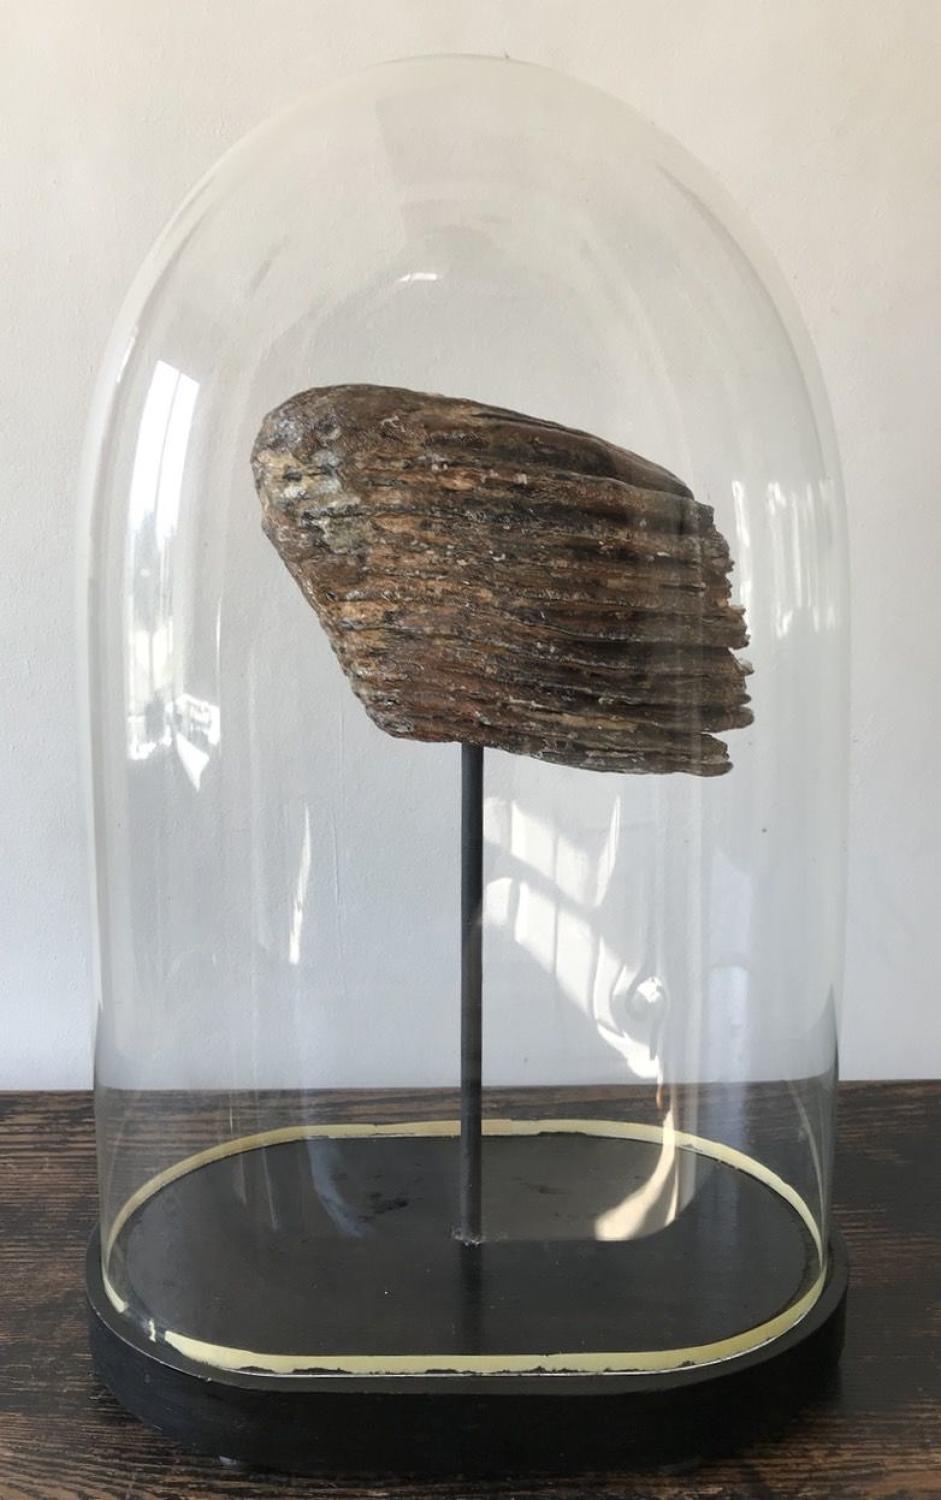 WOOLLY MAMMOTH TOOTH